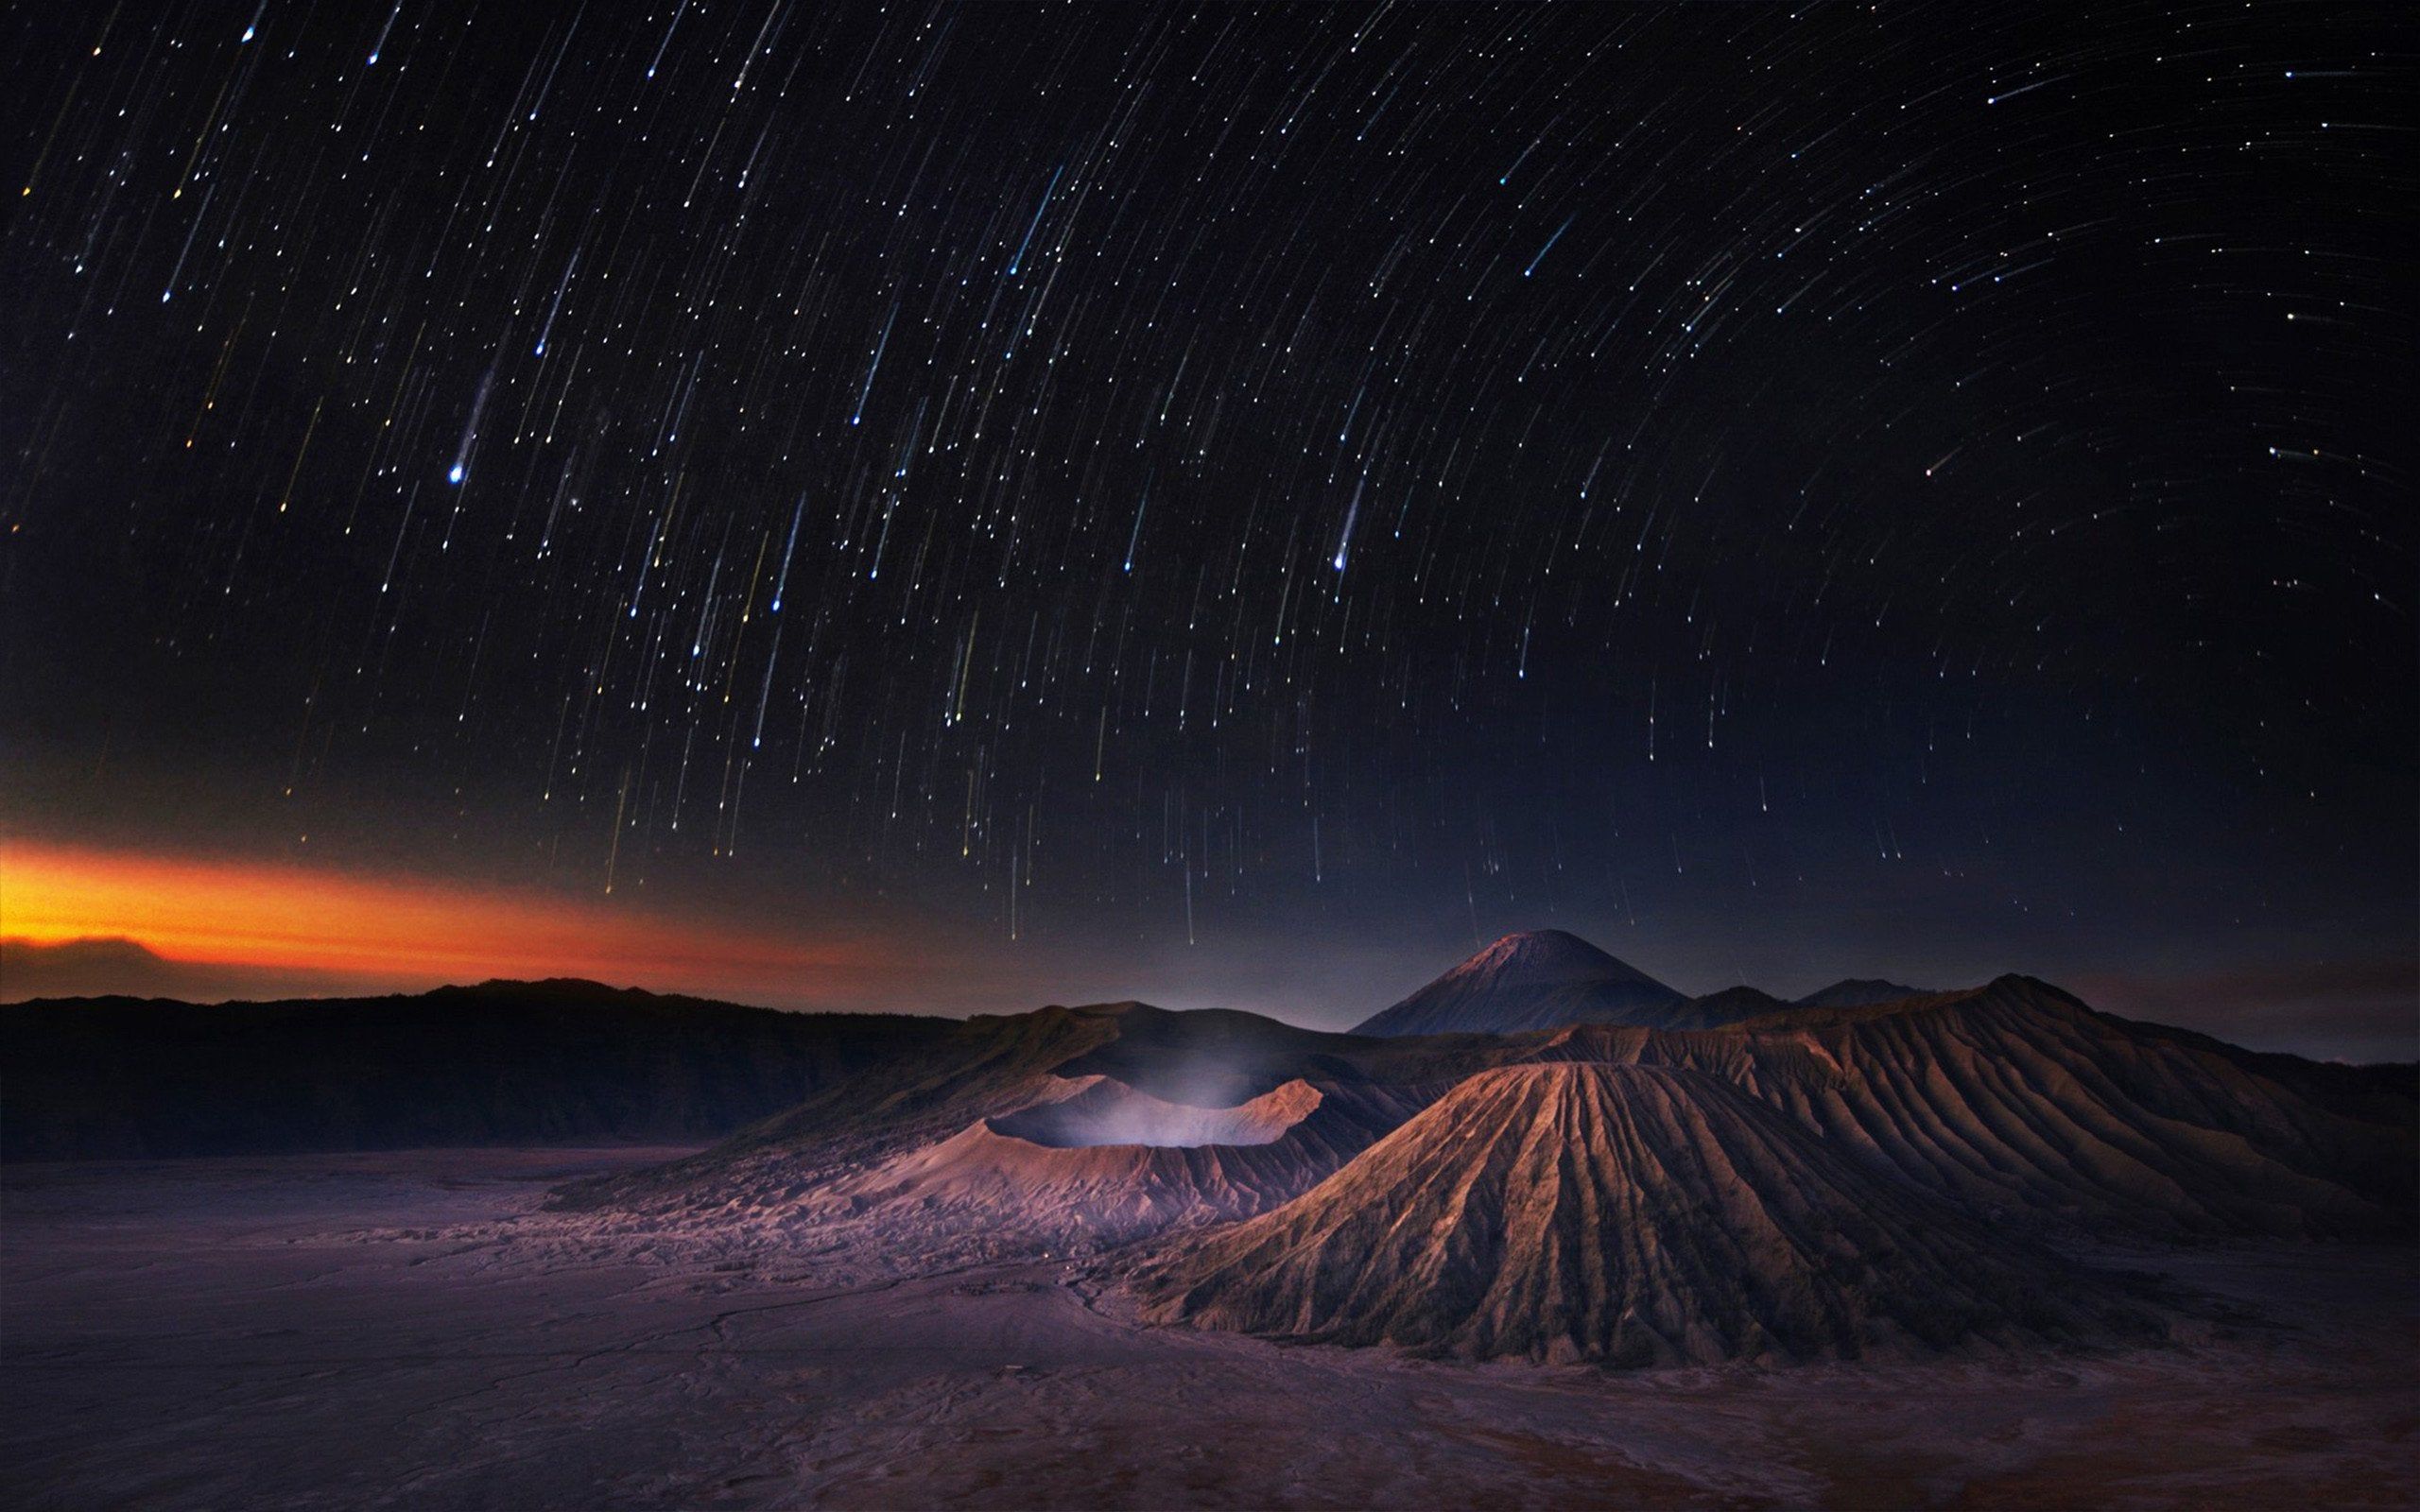 Star trails over Mt. Bromo, Indonesia [2560x1600]